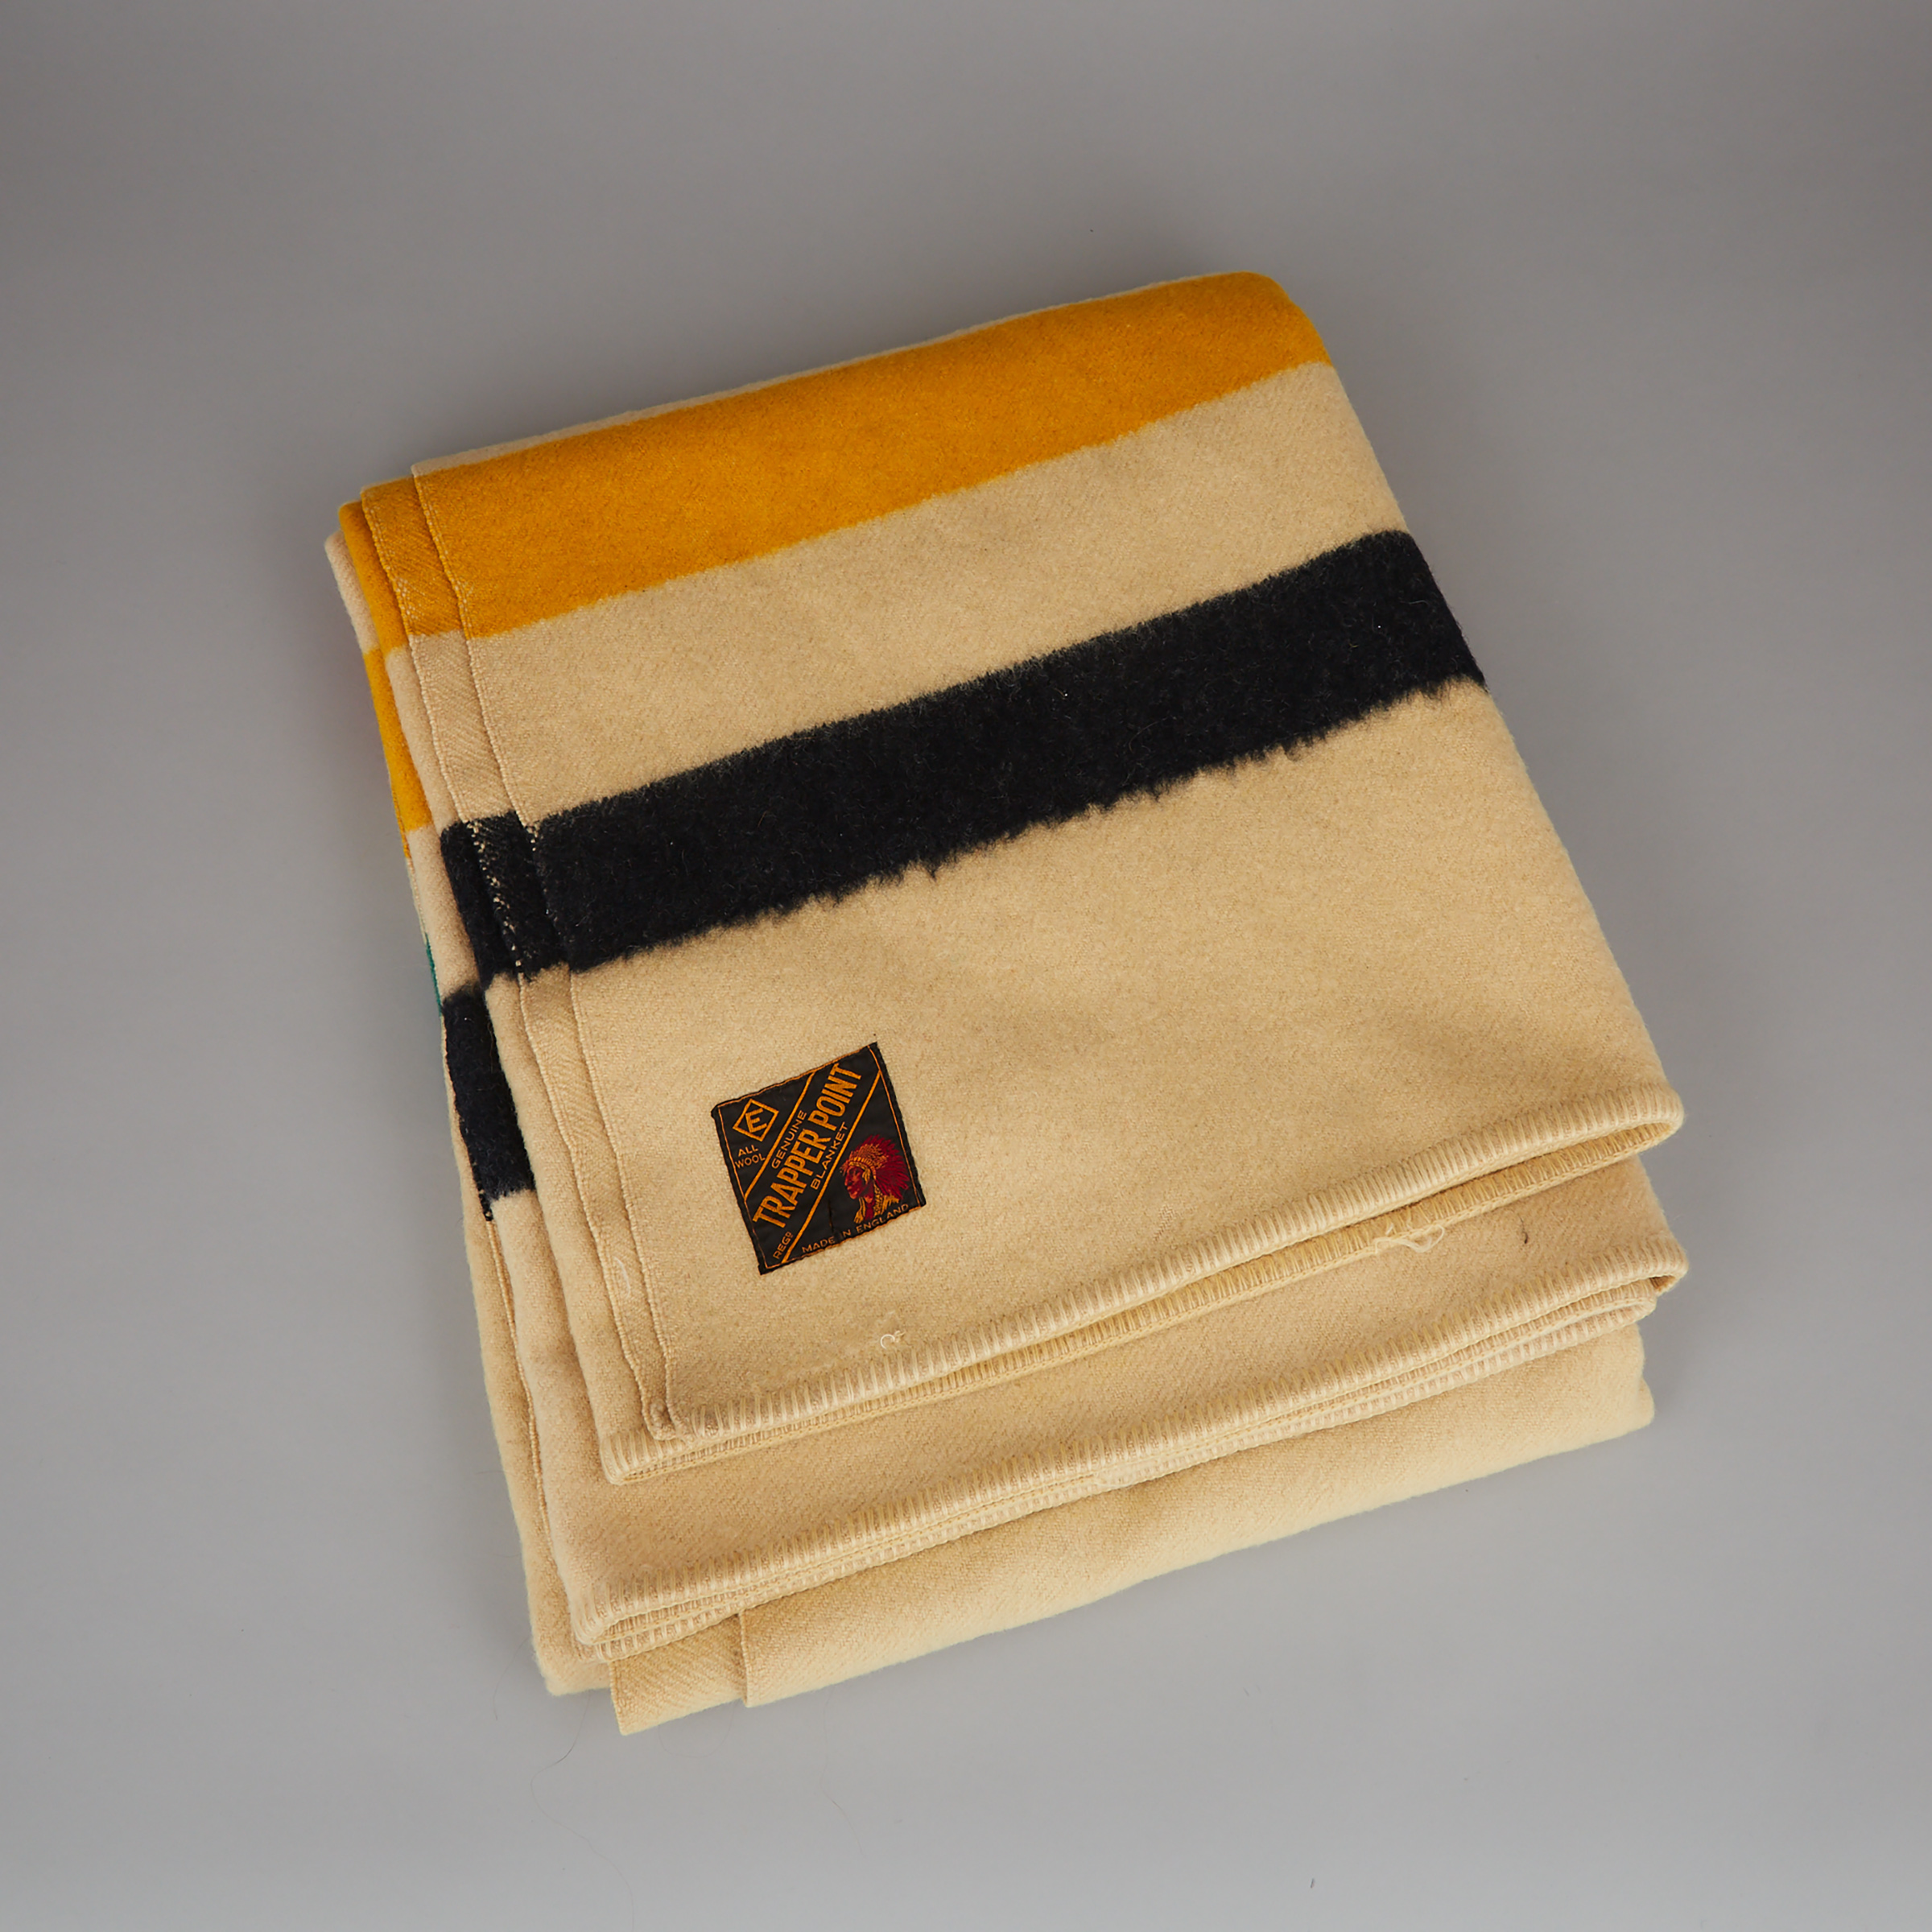 Eaton’s ‘Trapper Point’ Wool 4-Point Blanket, mid 20th century